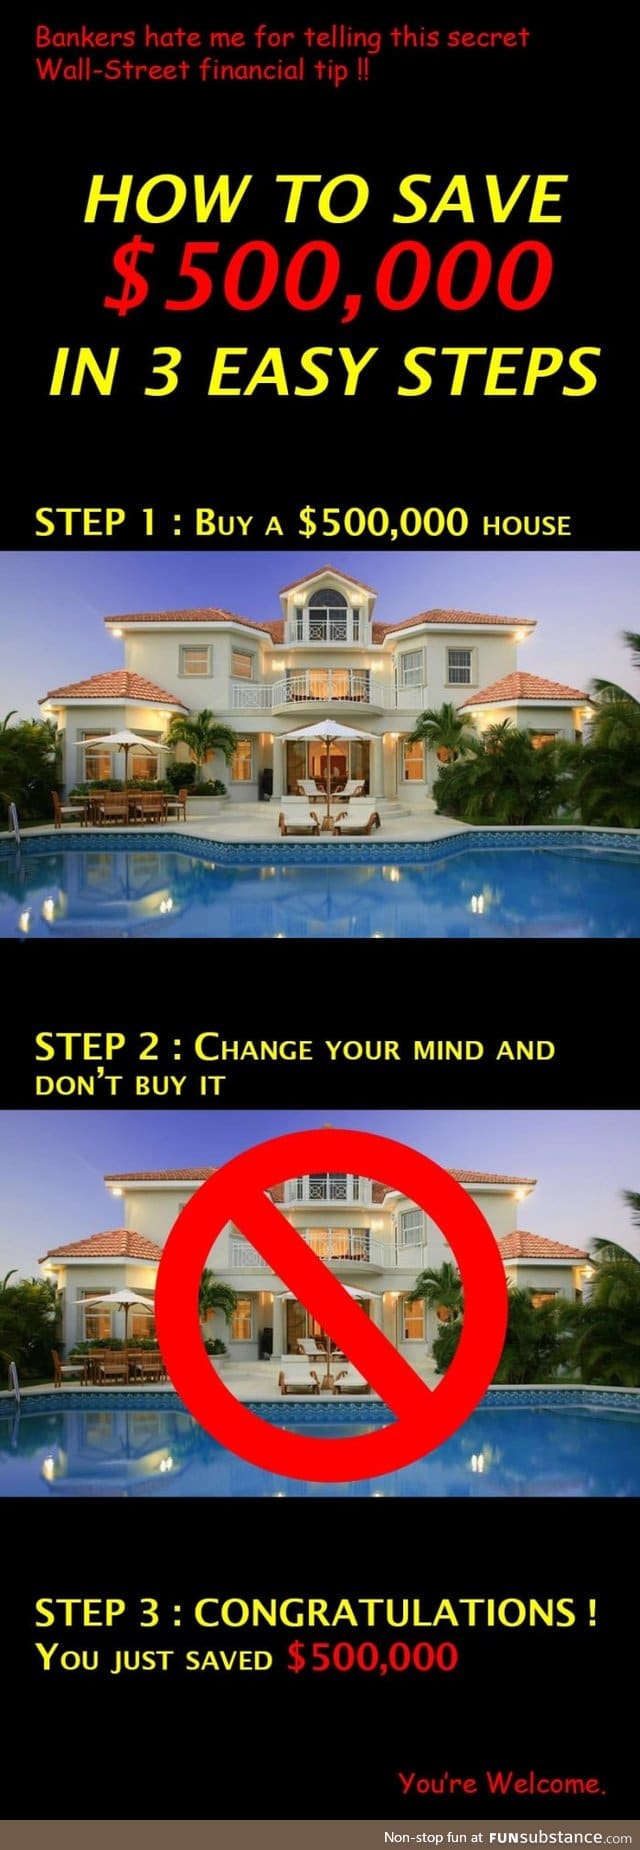 How to save $500,000